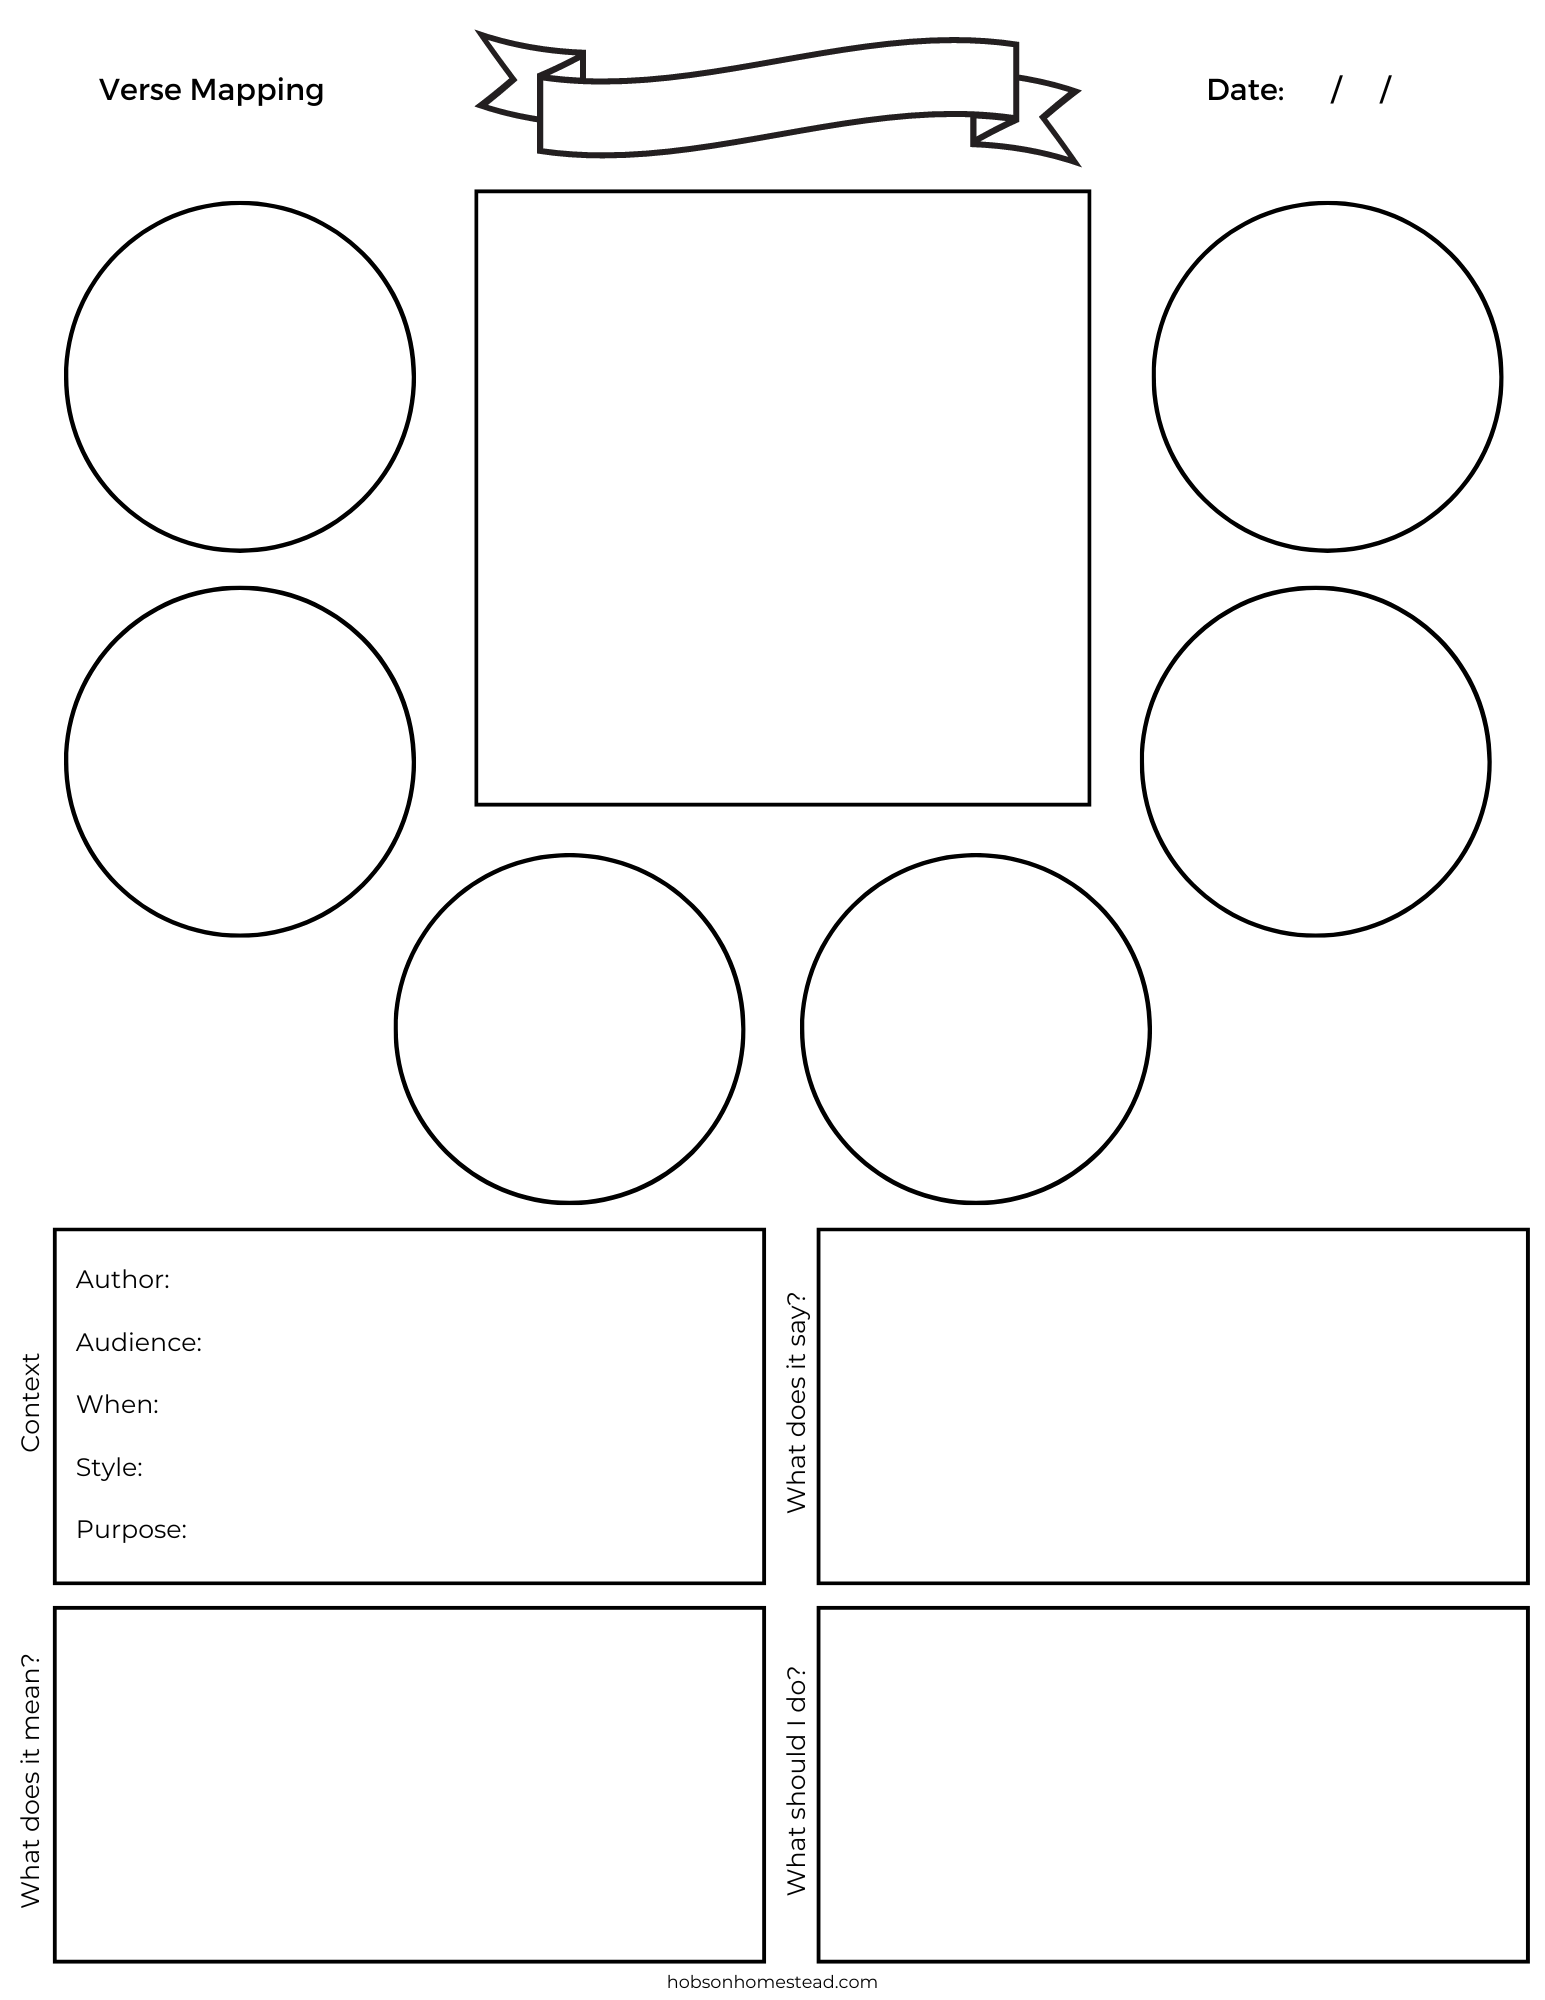 Free verse mapping template and instructions